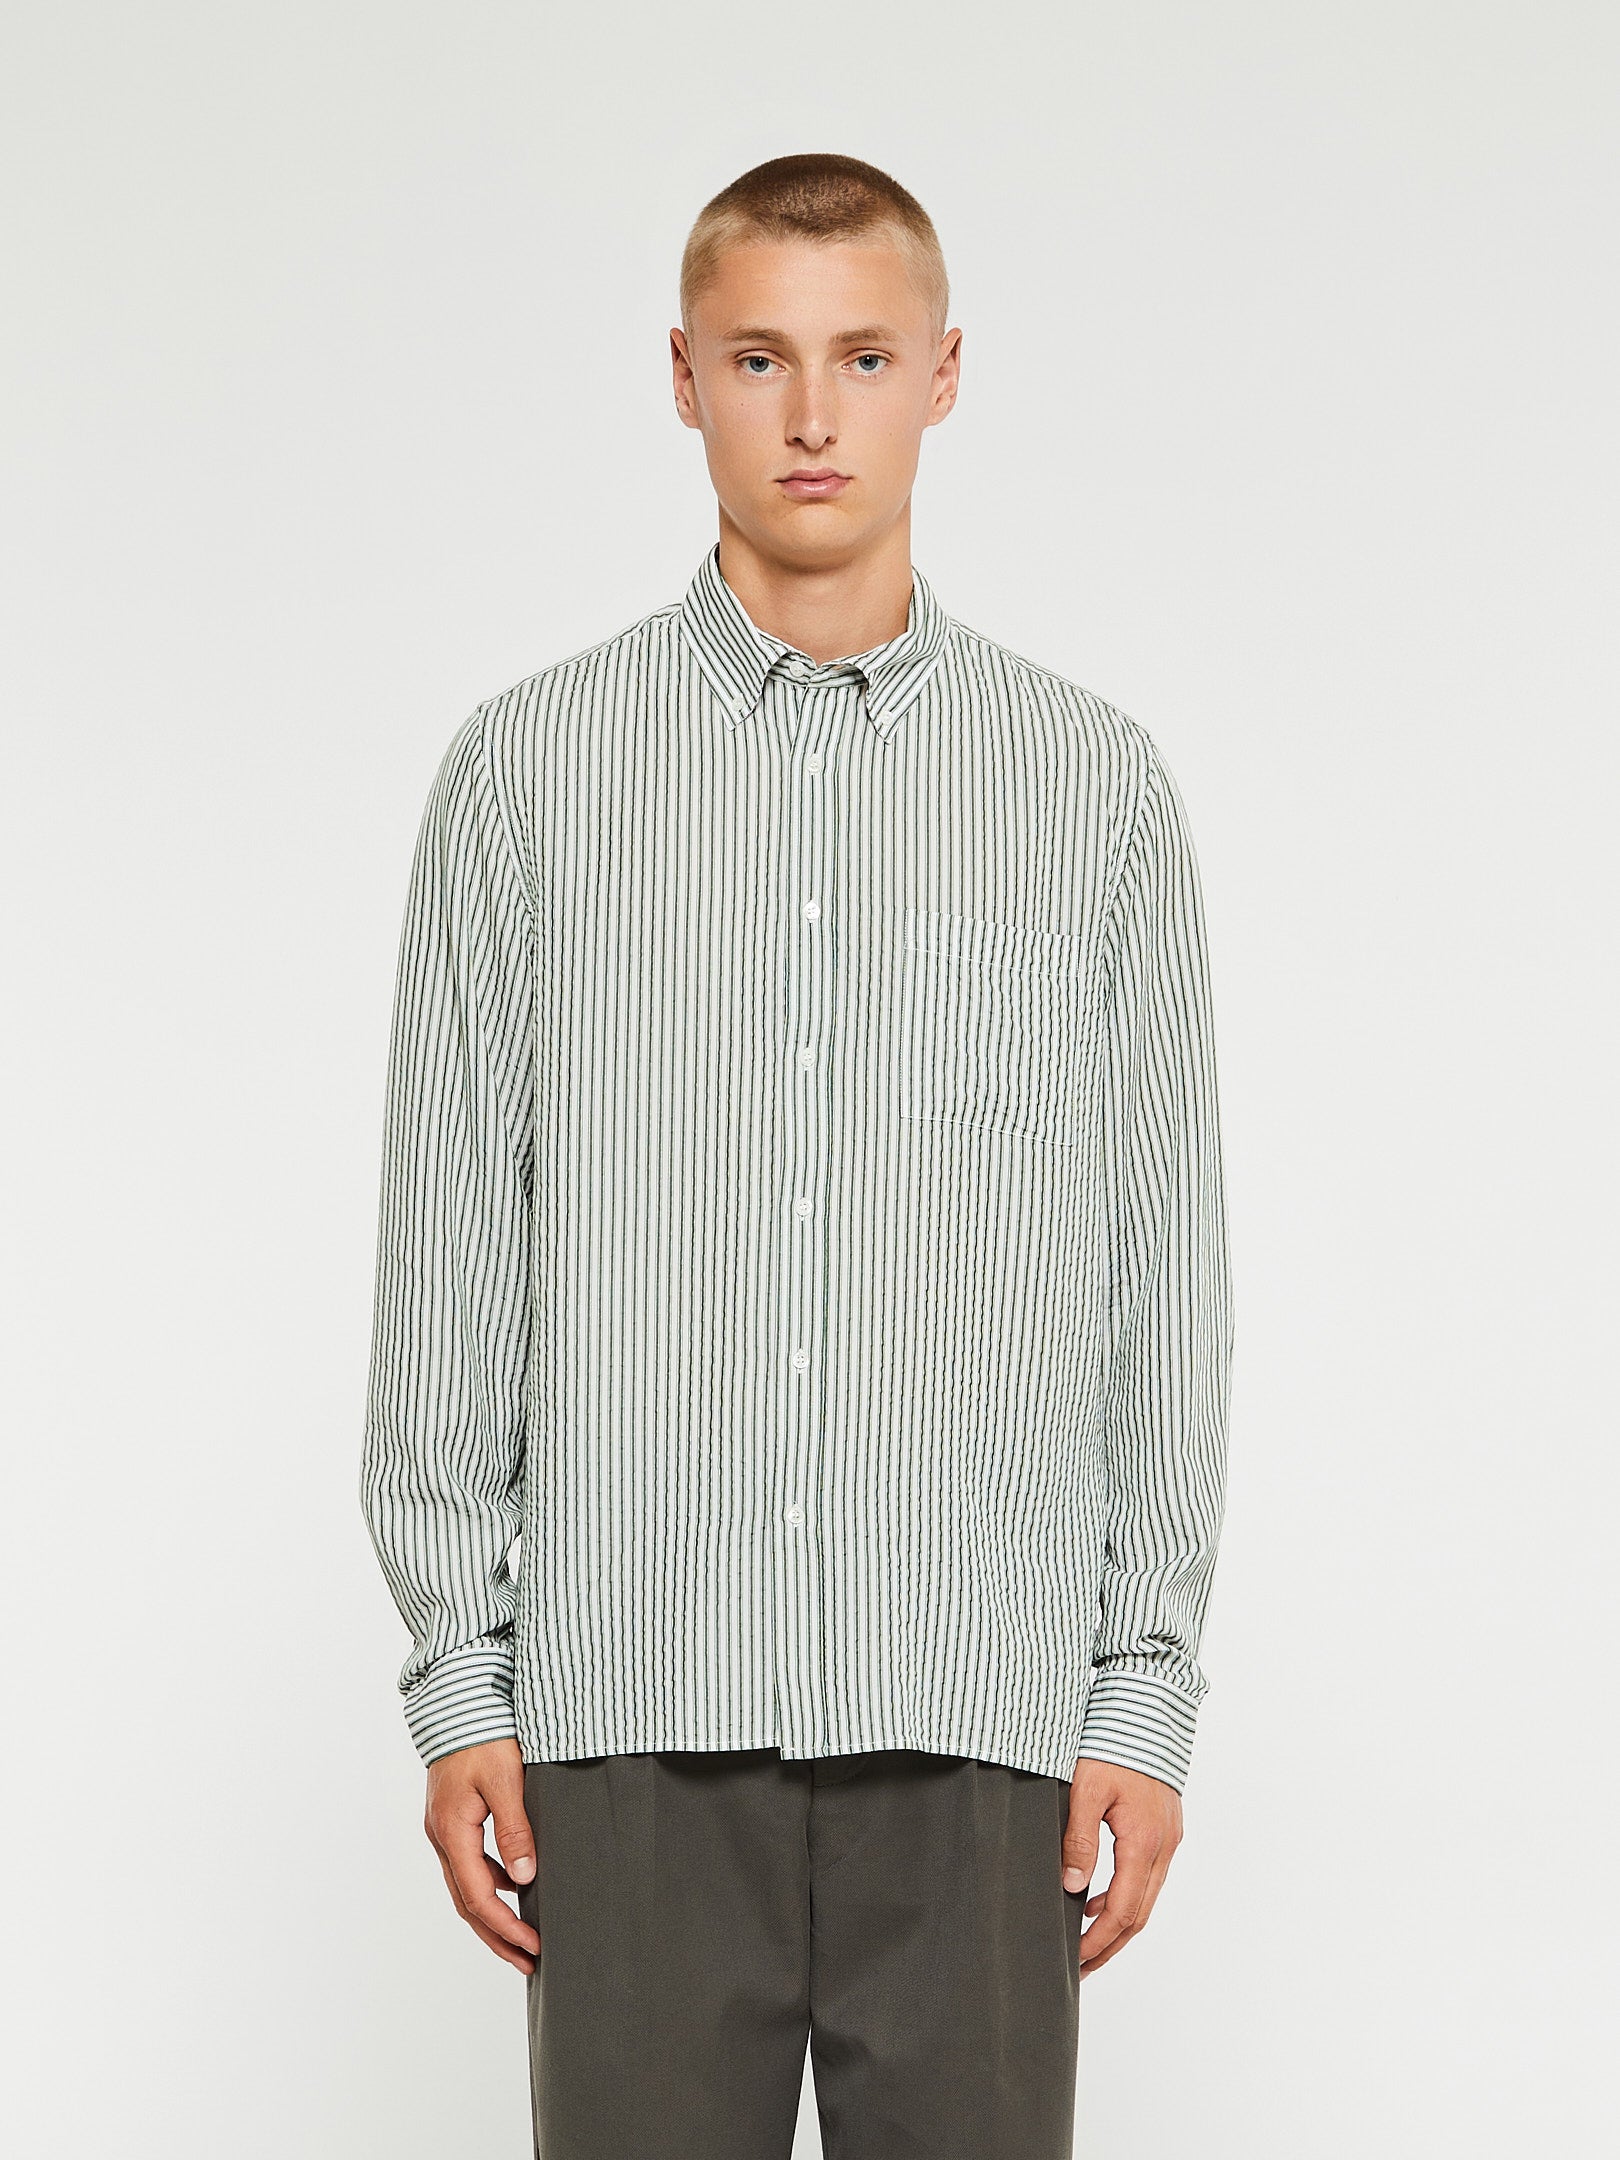 Another Aspect - Another Shirt 1.0 in Evergreen Stripe